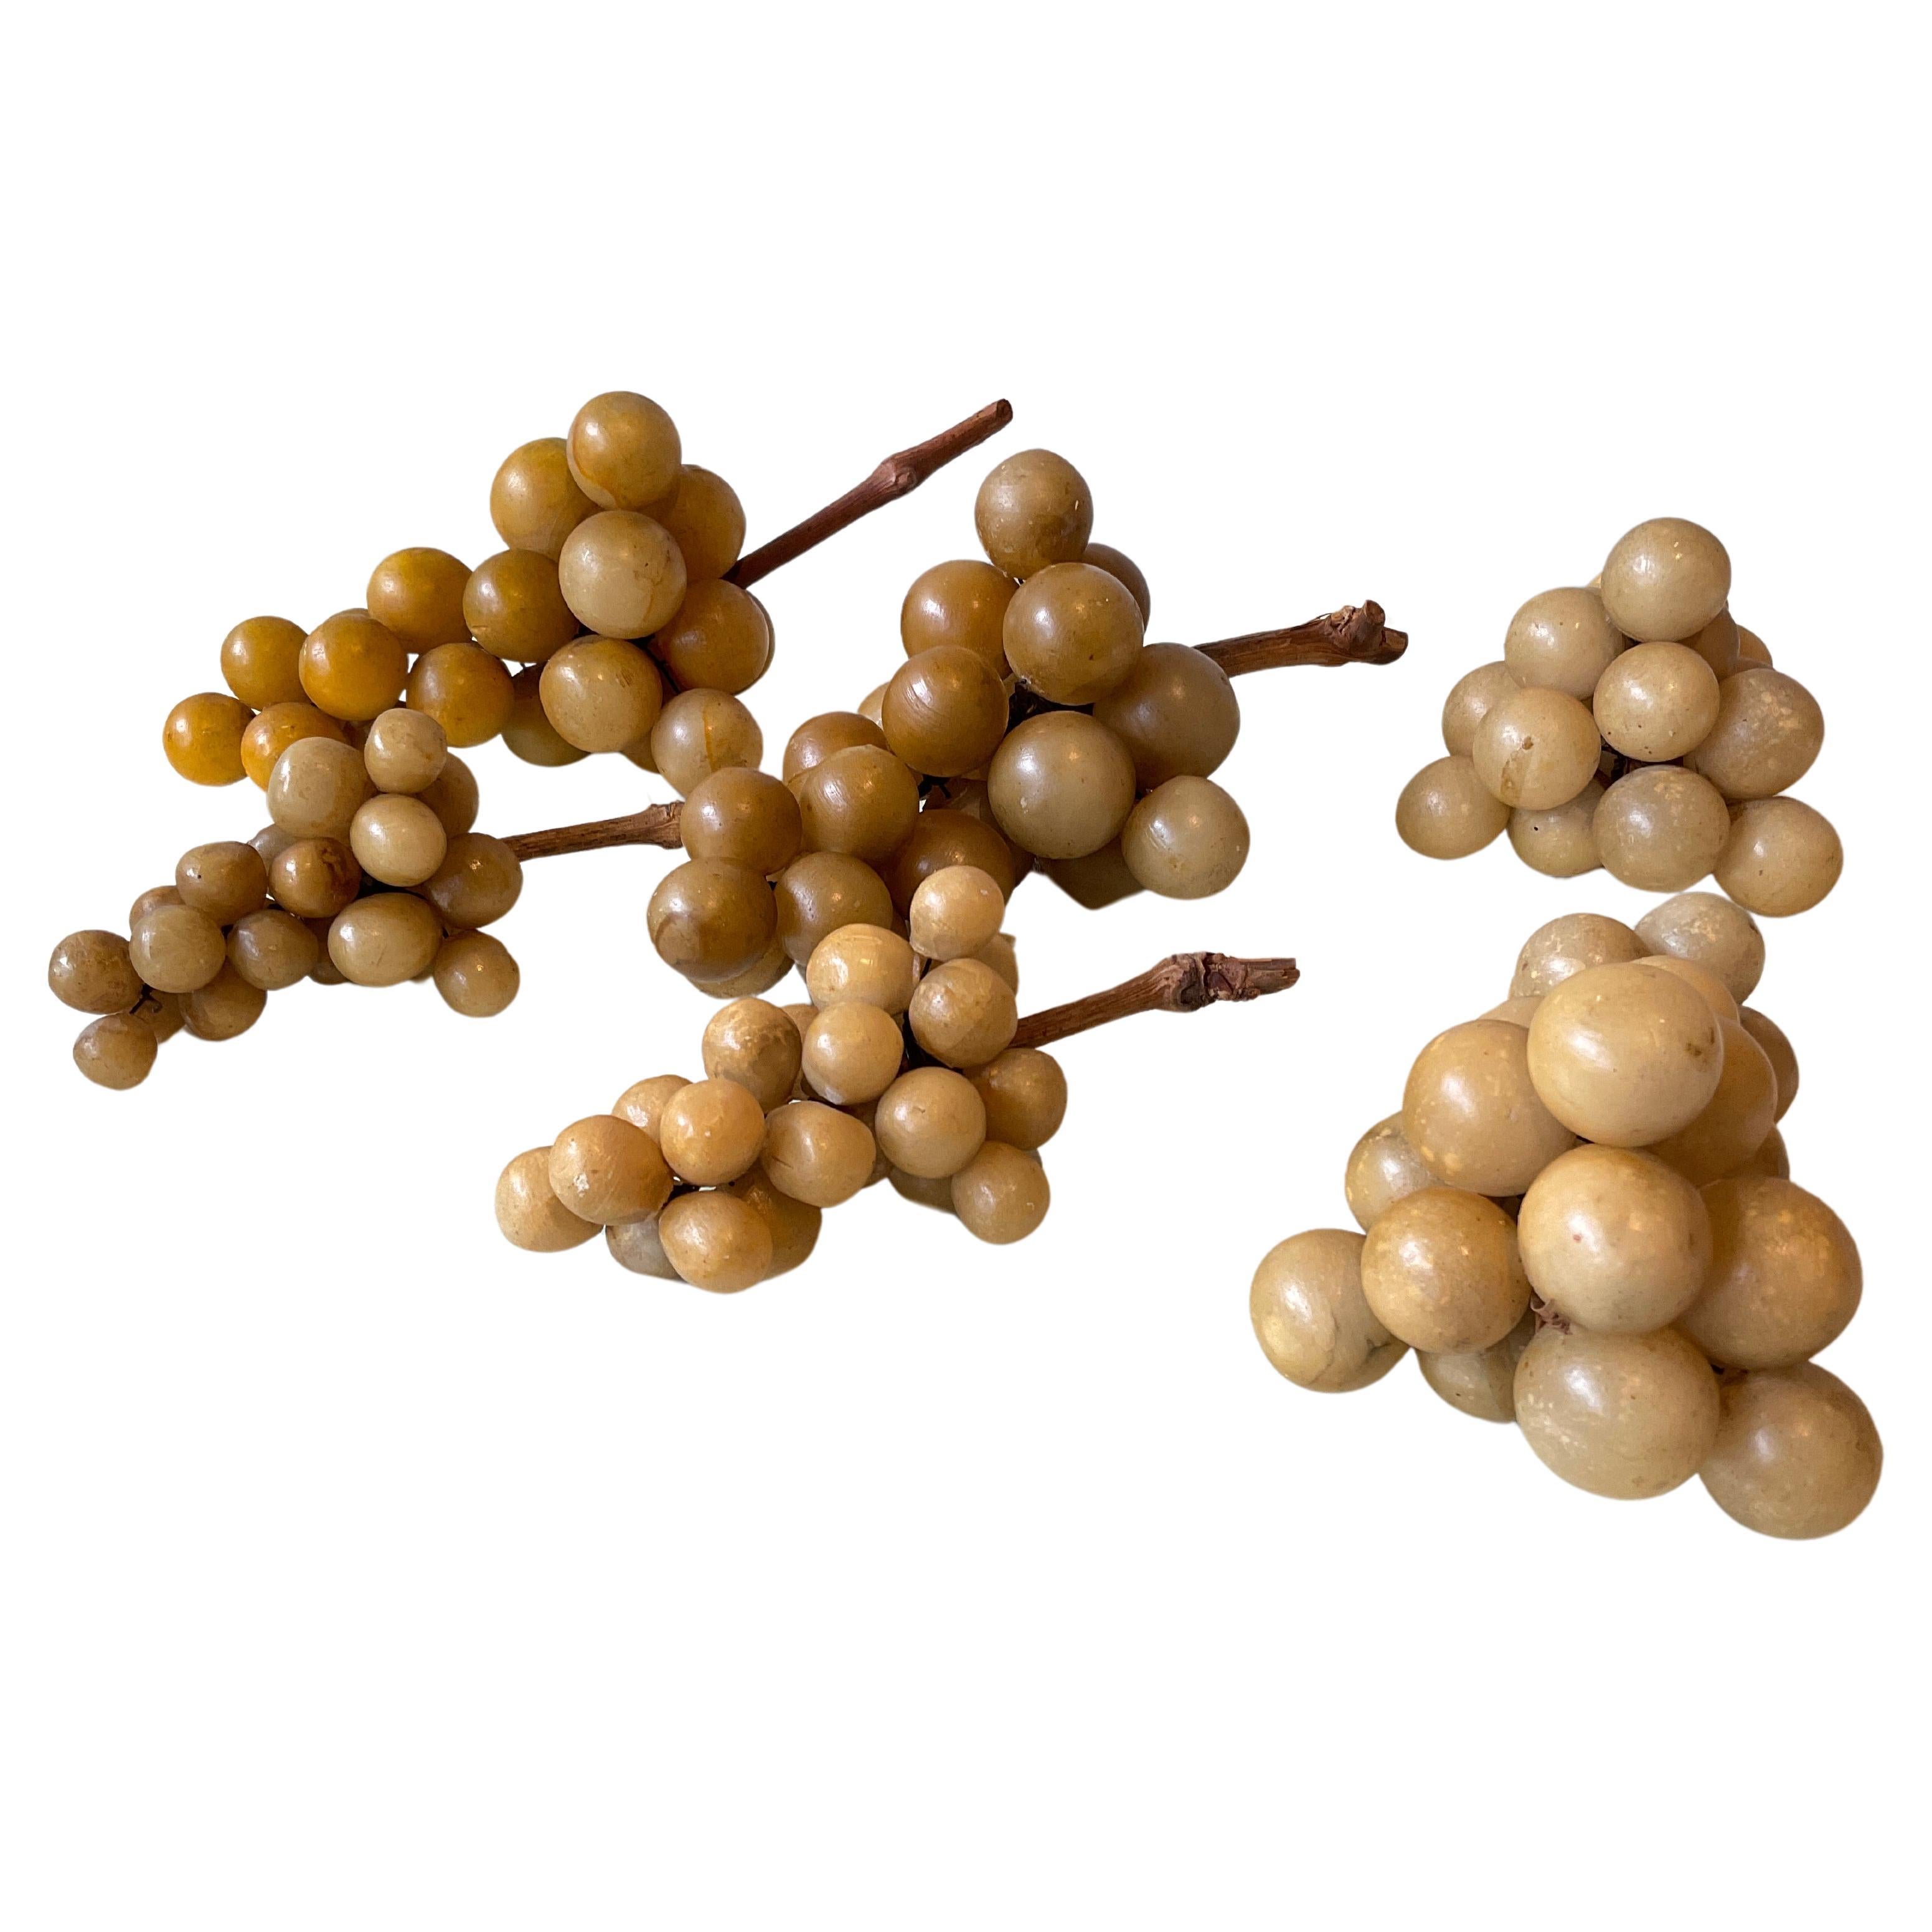 6 Bunches Of Marble Grapes For Sale